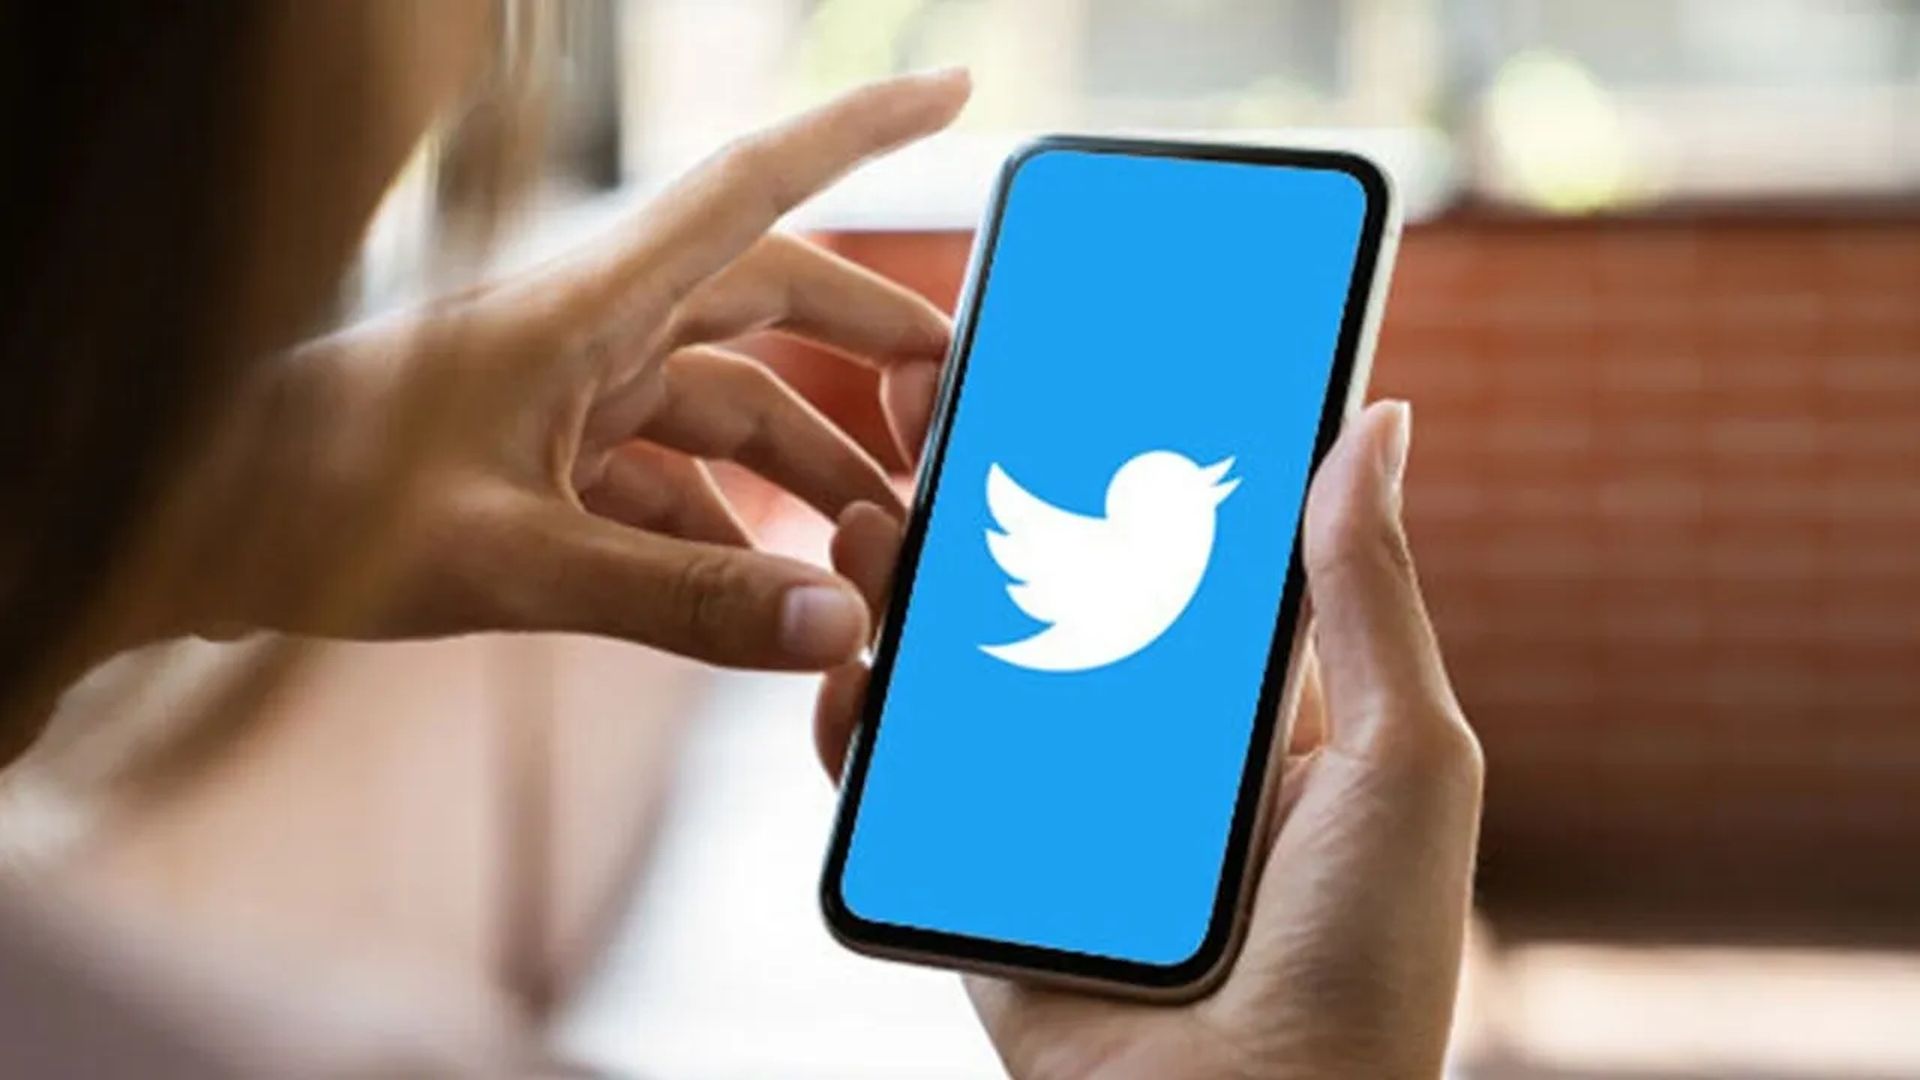 If you are someone who wishes some tweets could be more private; rejoice, as this feature allows you to do that and we will explain how to use Twitter Circle.